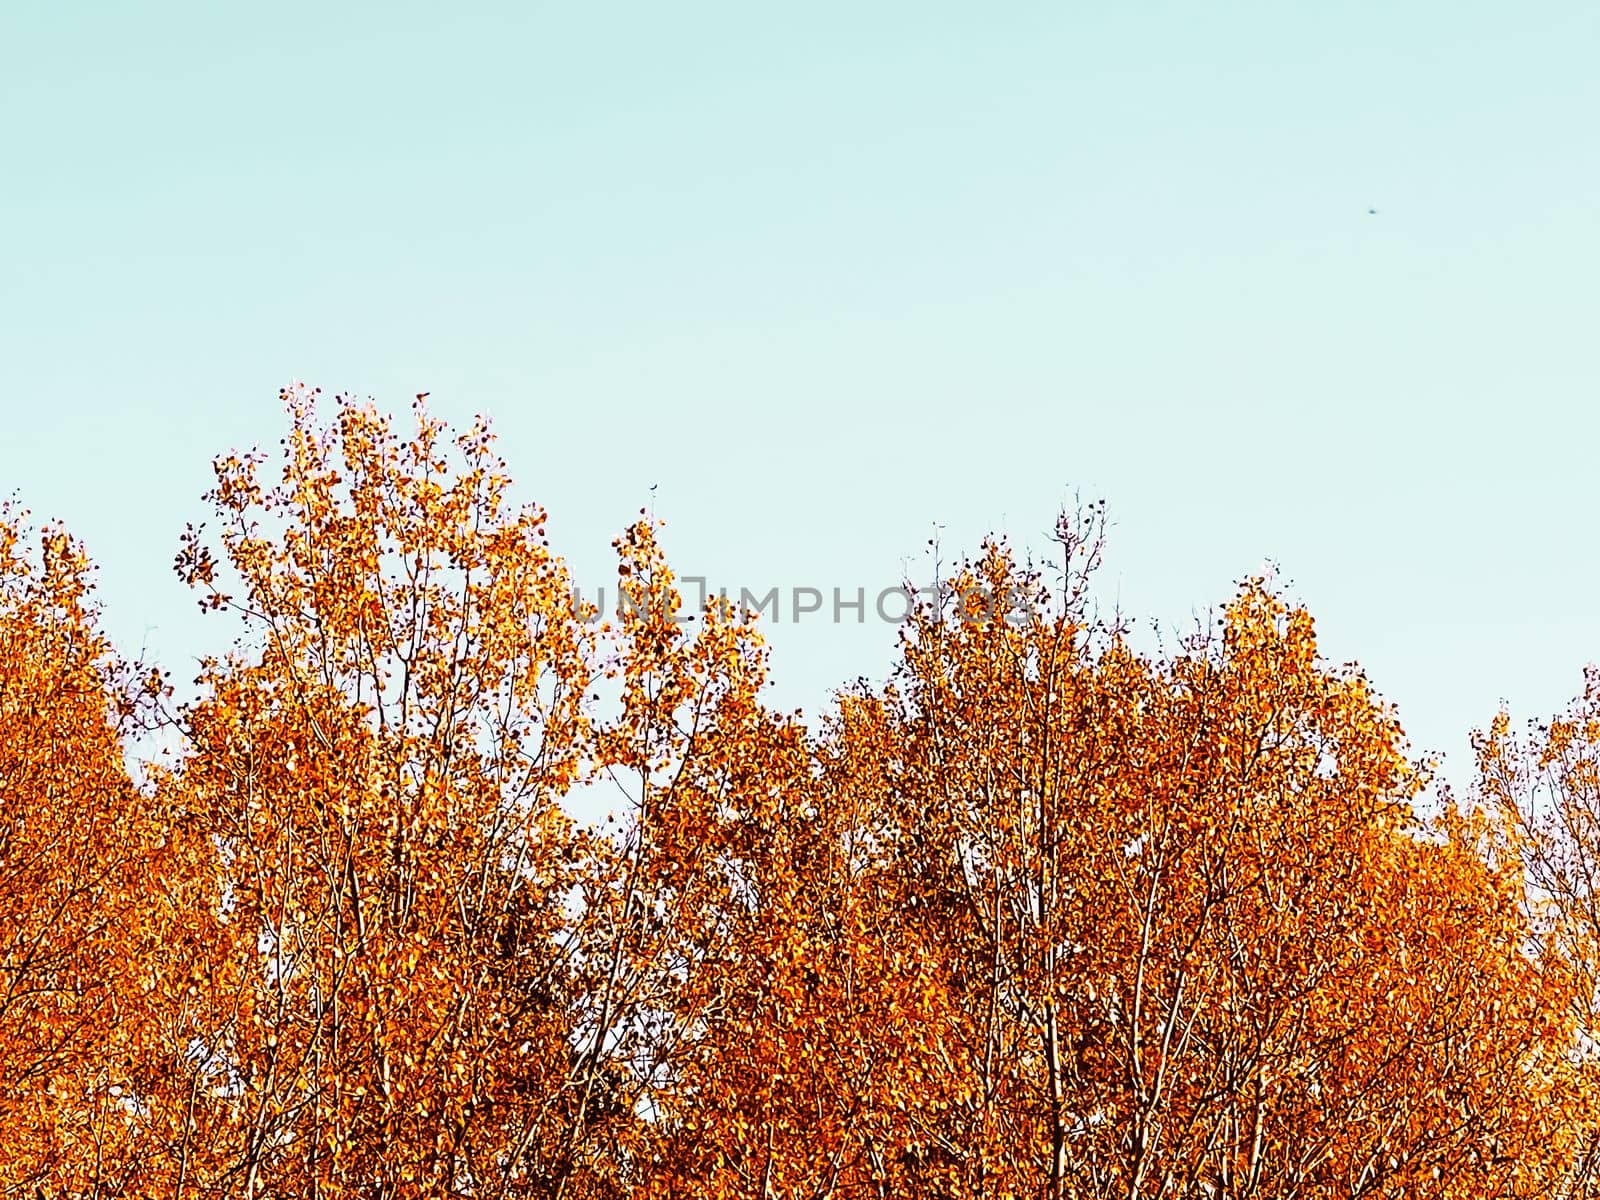 Nature, landscape and environment, golden autumn scenery with autumnal trees, leaves and foliage in fall season as picturesque seasonal holiday background by Anneleven